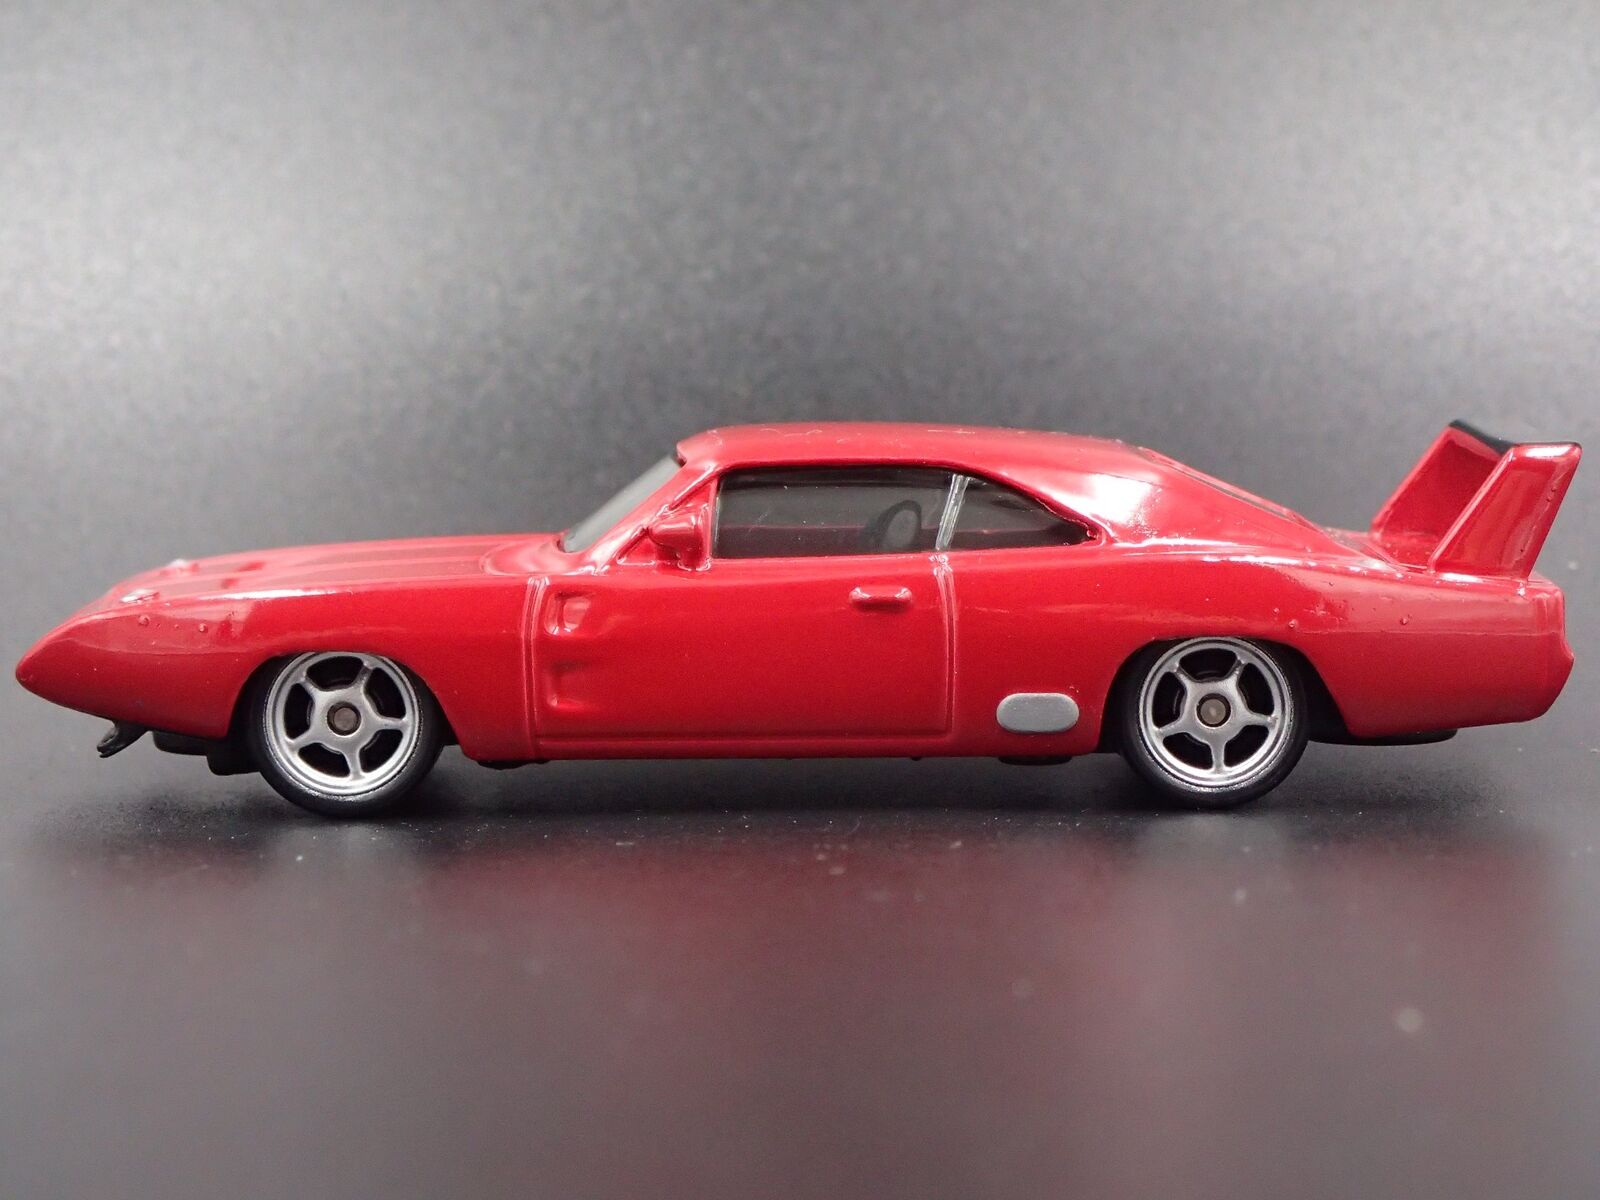 1969 69 DODGE CHARGER DAYTONA FAST & FURIOUS 6 RARE 1:55 SCALE DIECAST relisted